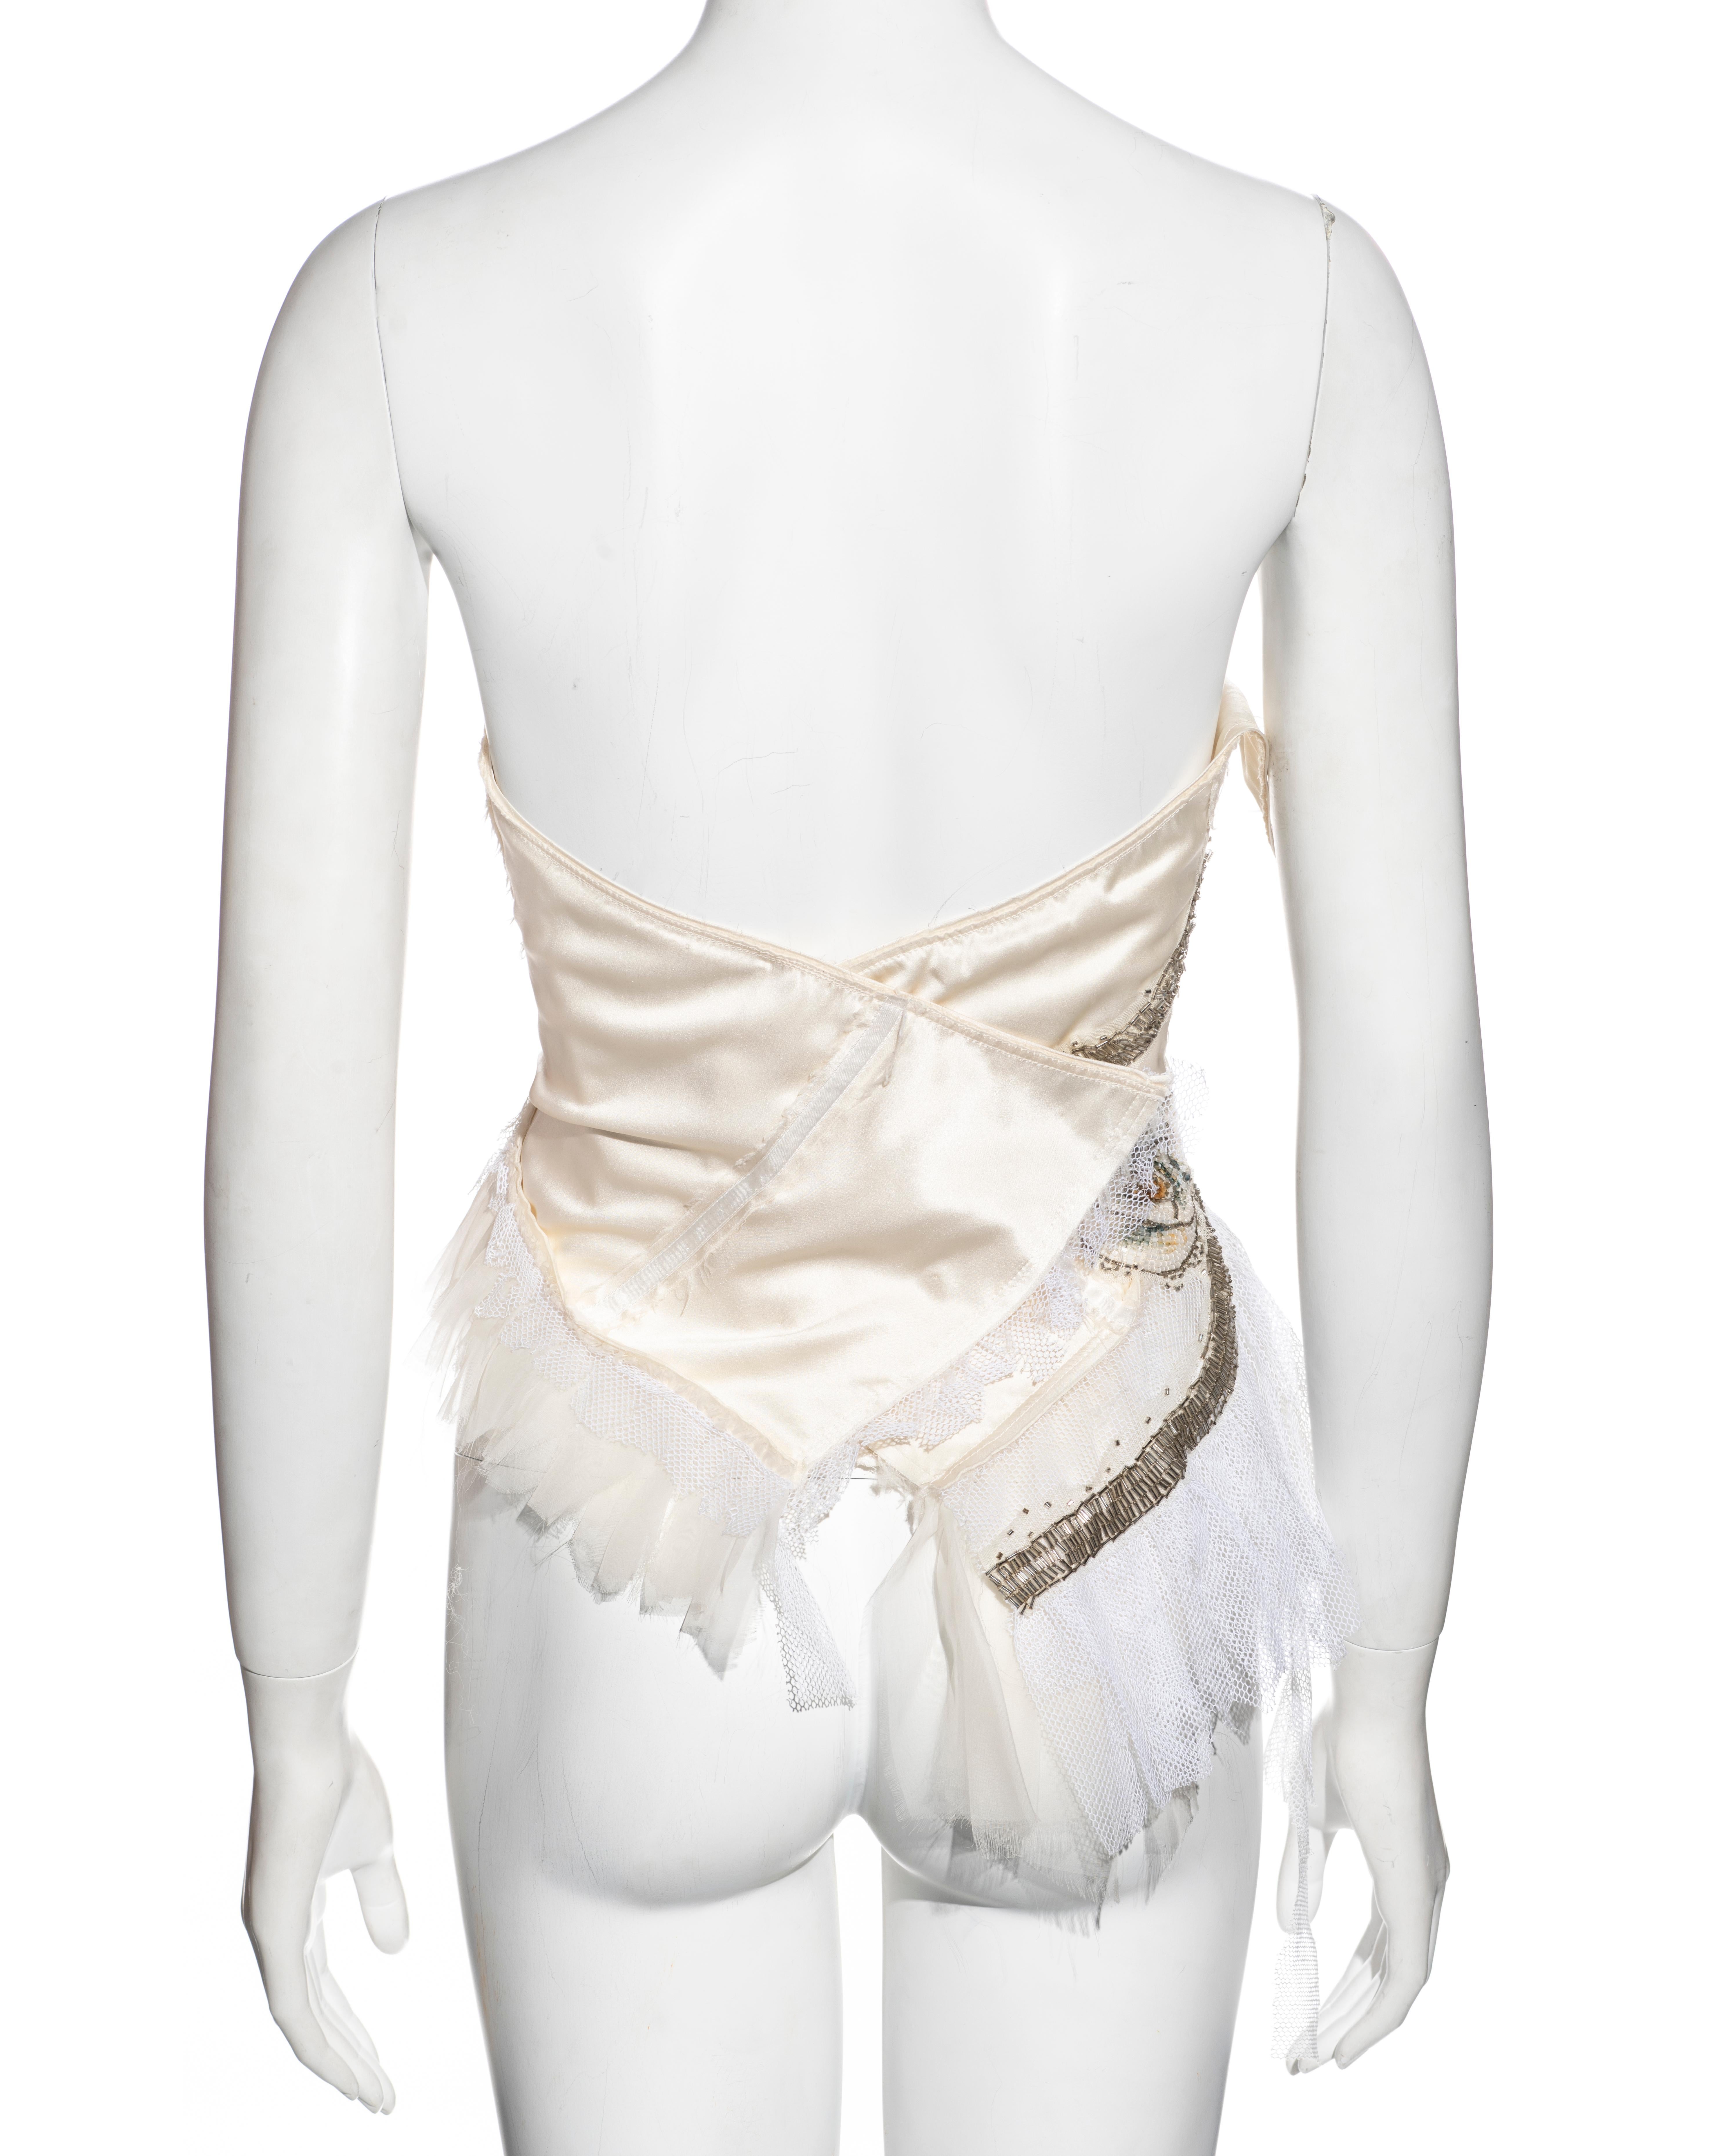 Christian Dior by John Galliano silk and tulle embellished corset, ss 2001 2